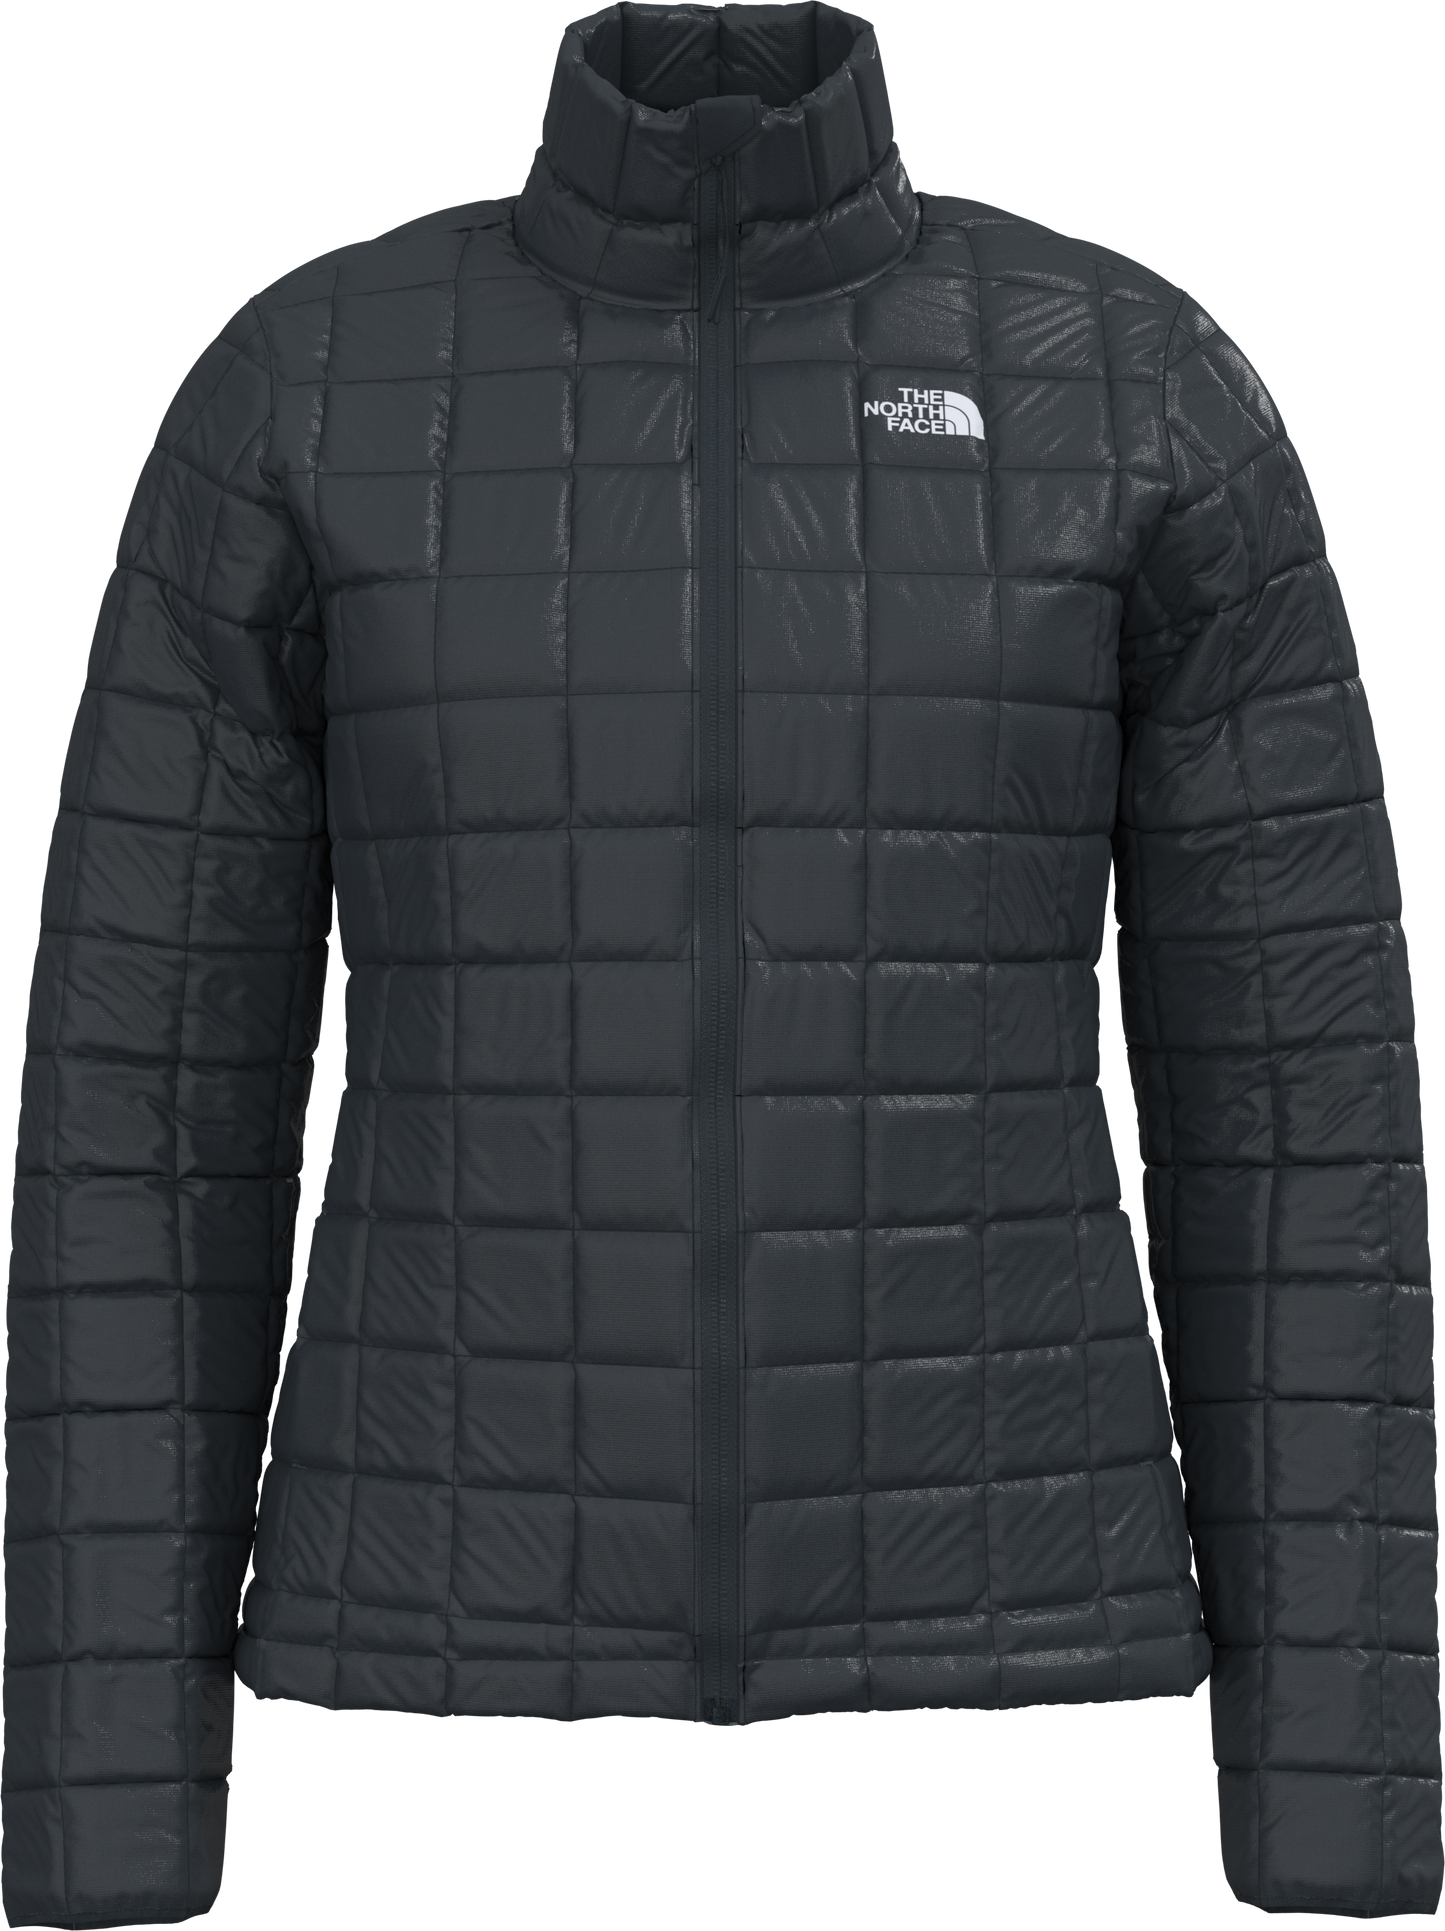 The North Face Apparel Women's Thermoball Eco Jacket 2.0 Tnf Black